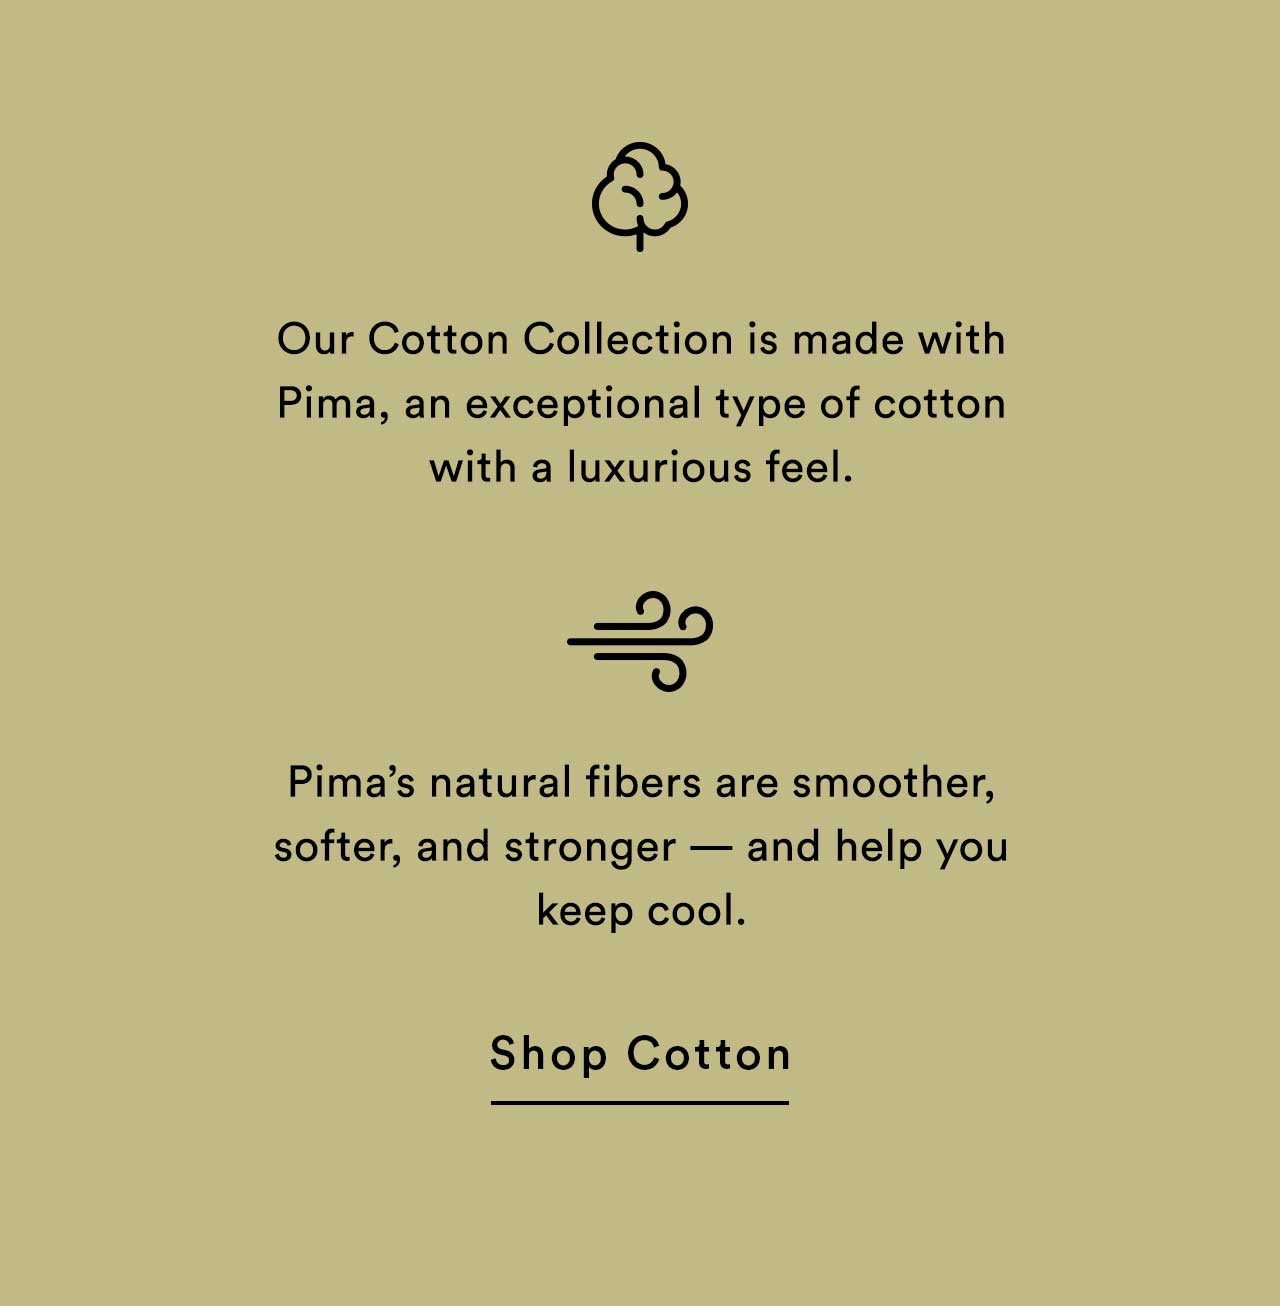 24/7™ Our Cotton Collection is made with Pima, an exceptional type of cotton with a luxurious feel. Pima’s natural fibers are smoother, softer, and stronger — and help you keep cool. | Shop Cotton